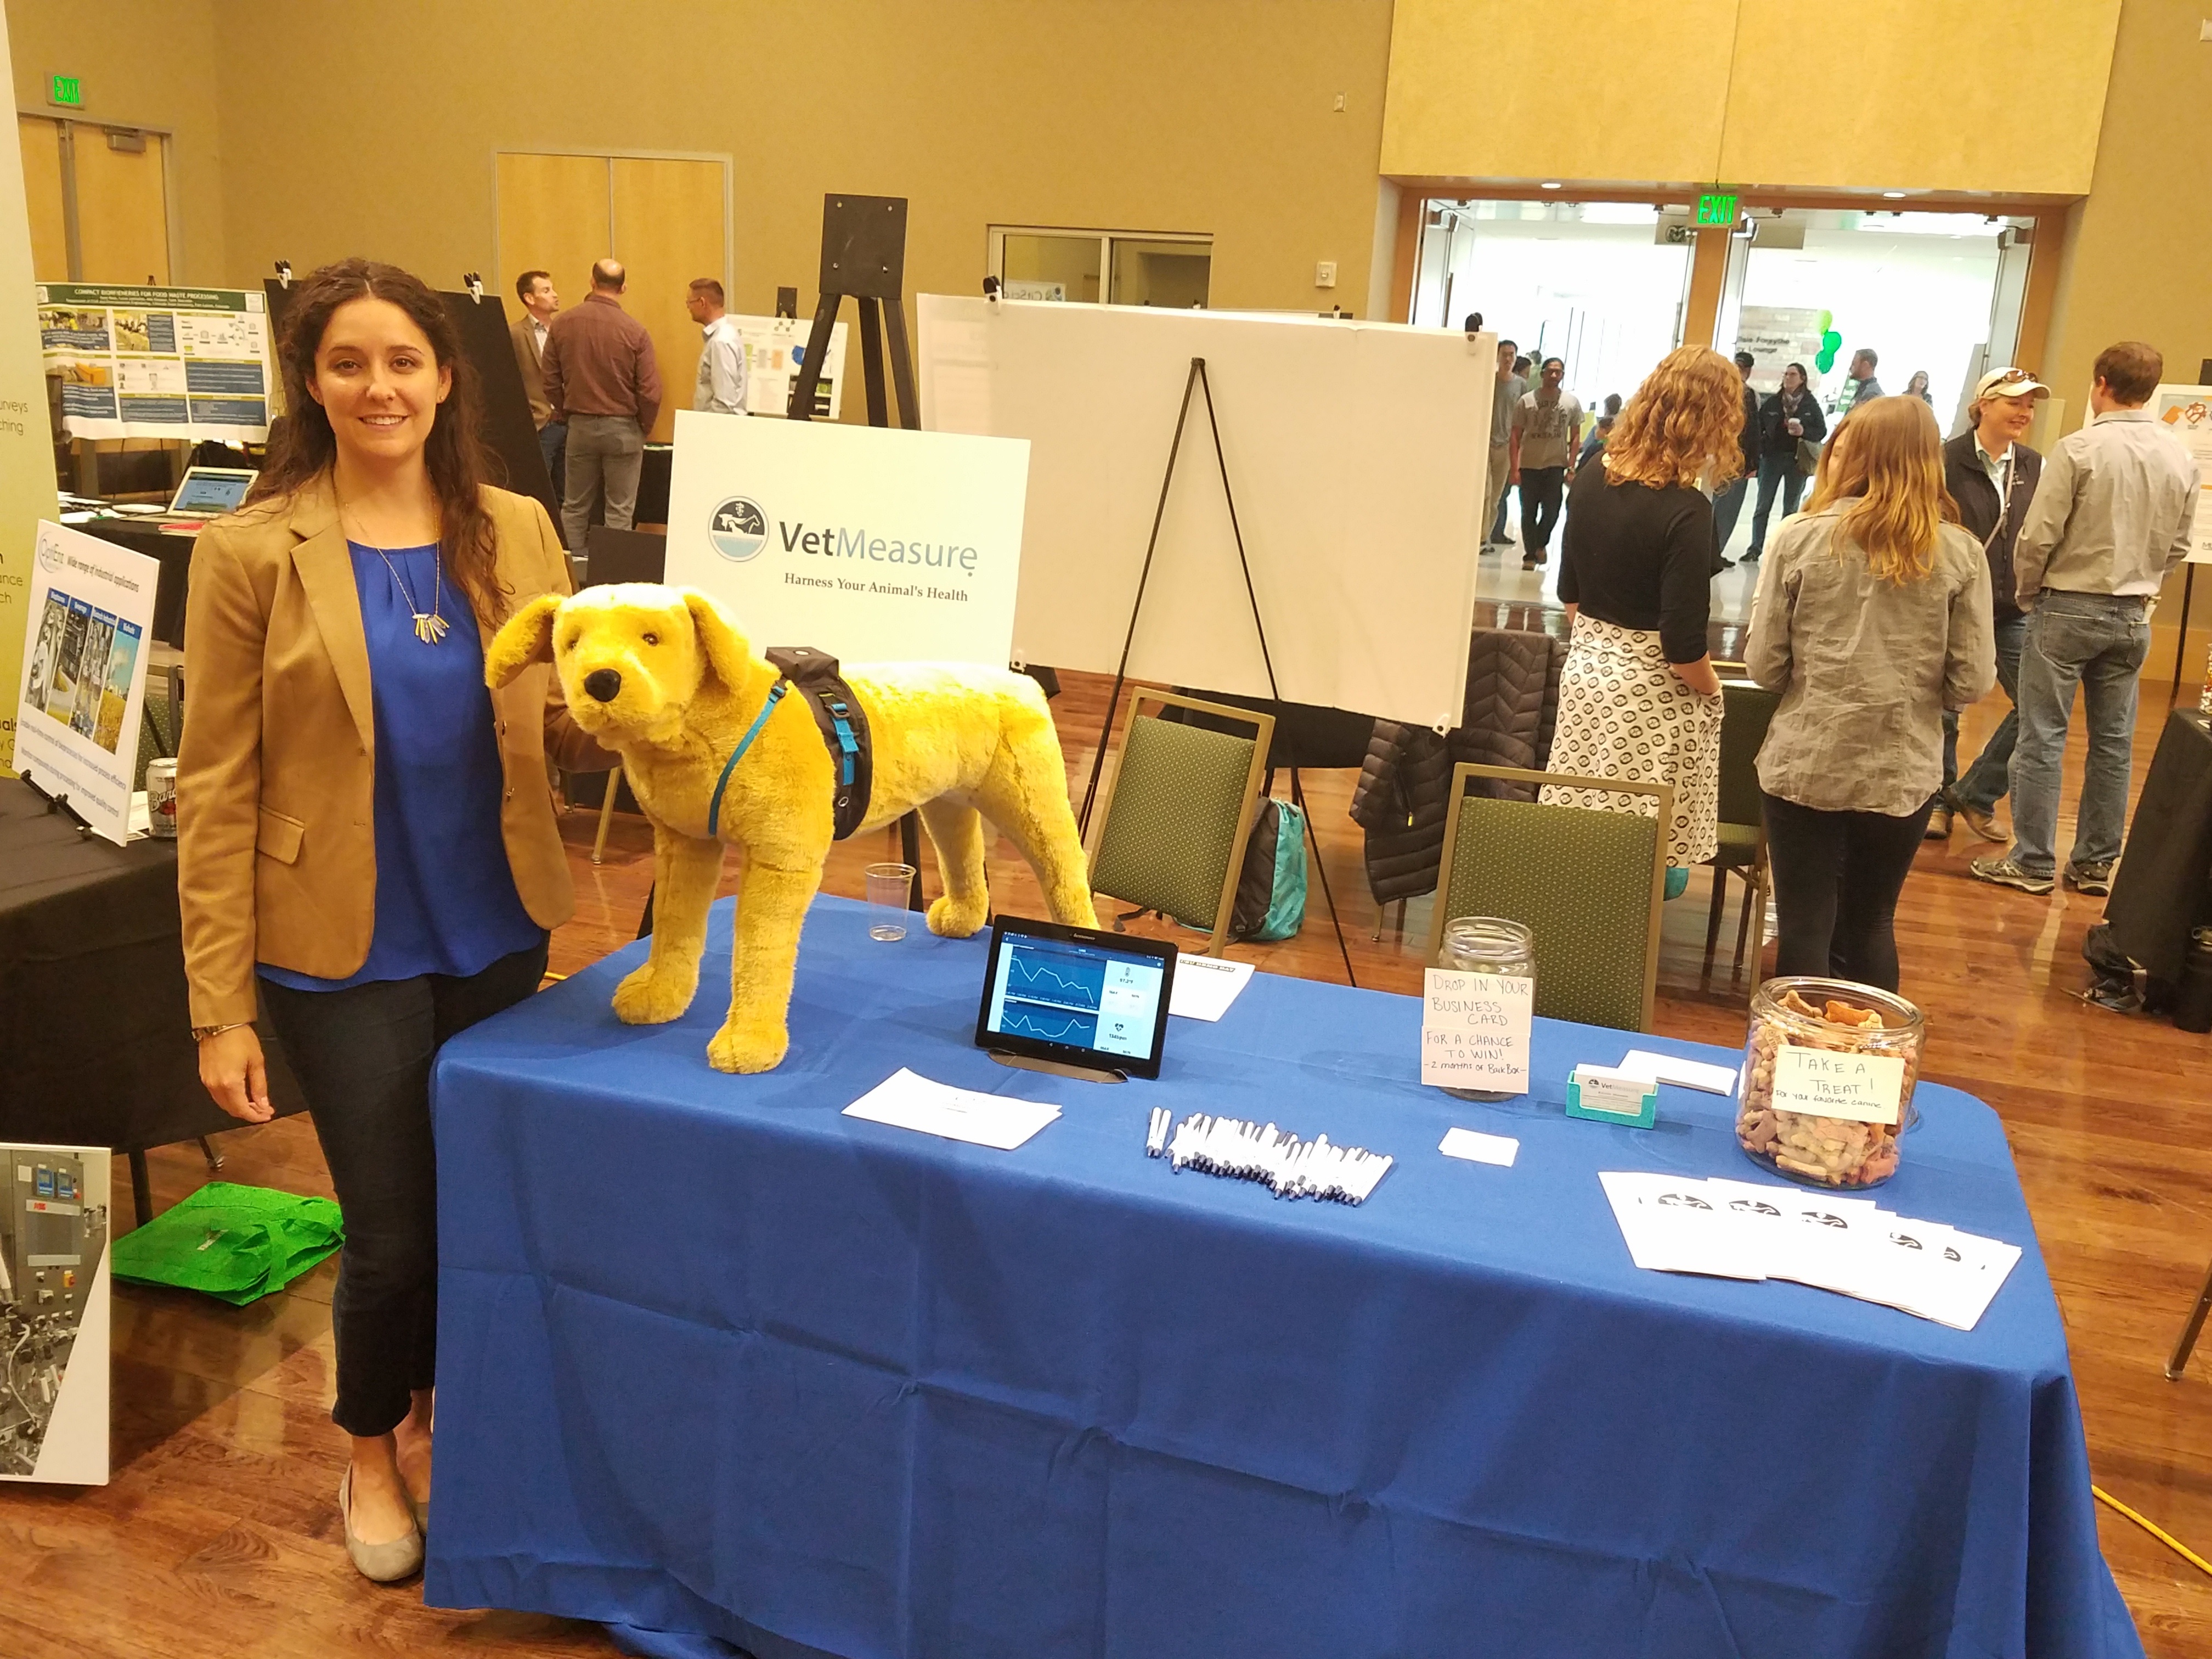 A female VetMeasure representative wearing black pants, a royal blue shirt, and a tan jacket stand next to a trade-show table of VetMeasure promotional items. Additional tables and people are visible in the background. 